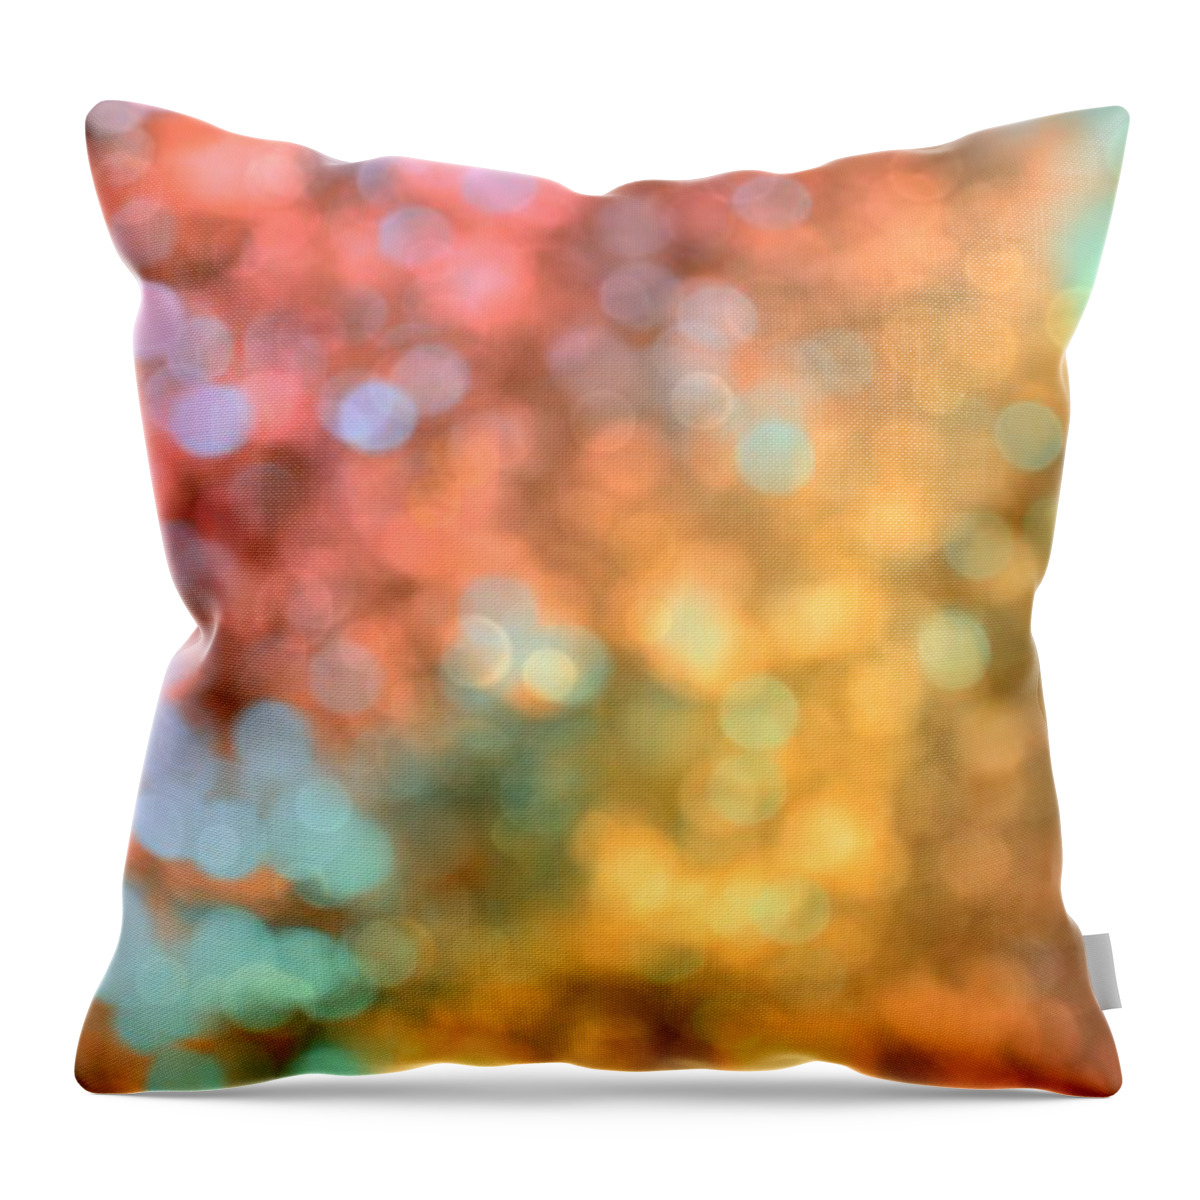 Reflections Throw Pillow featuring the photograph Reflections - Abstract by Marianna Mills